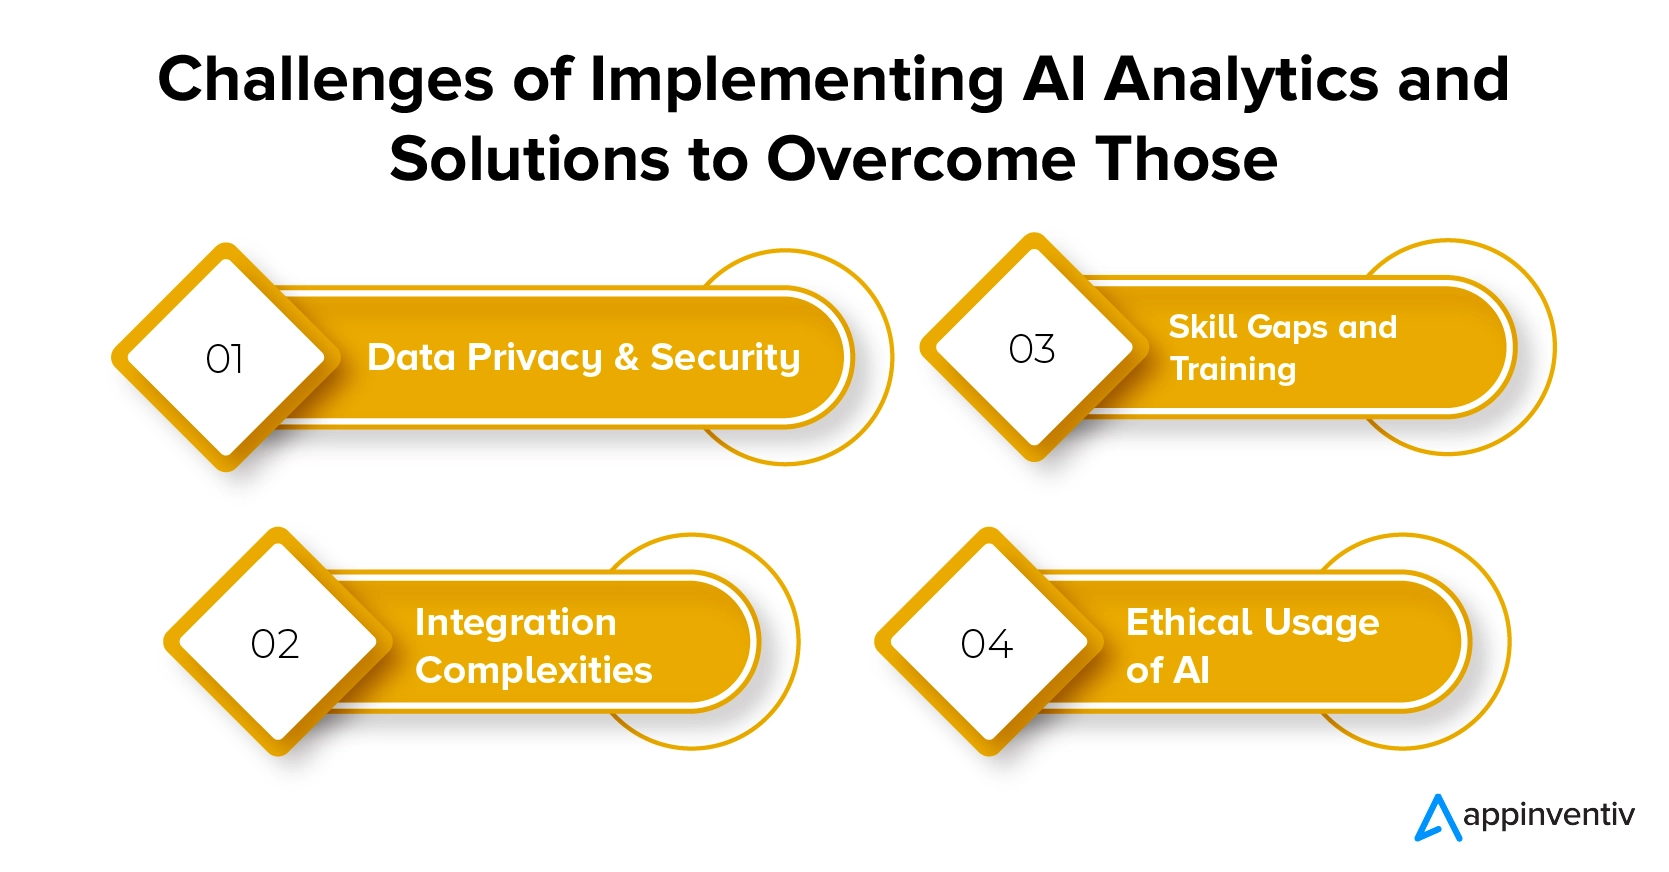 Challenges of implementing AI analytics and solutions to overcome those